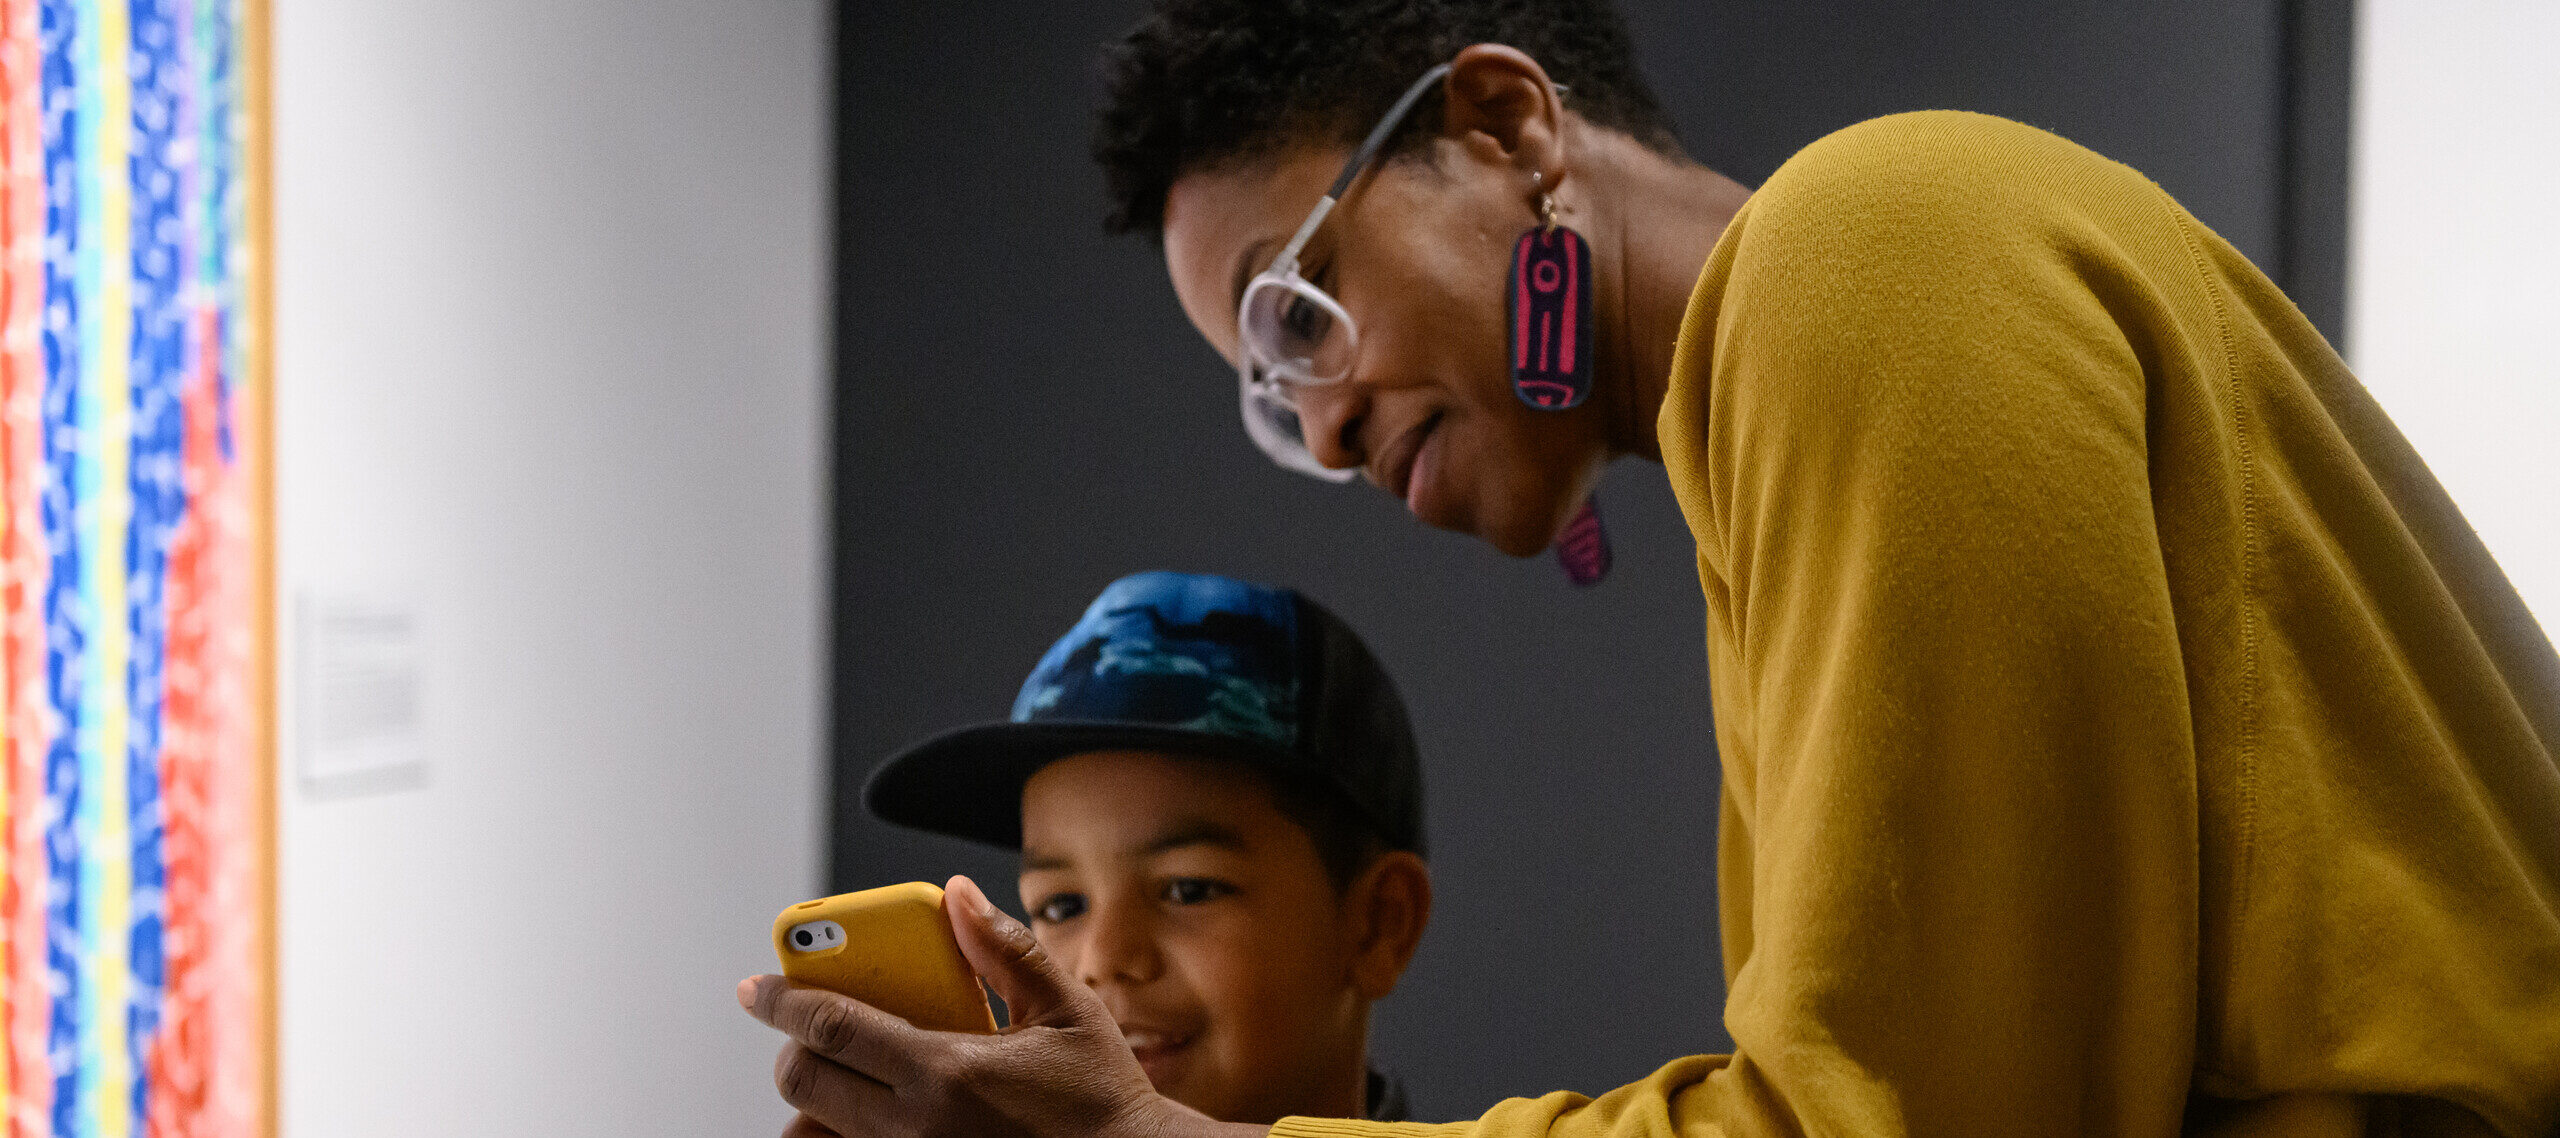 A dark-skinned woman wearing glasses shows a child something on the screen of her phone. In the background is a colorful work of art.